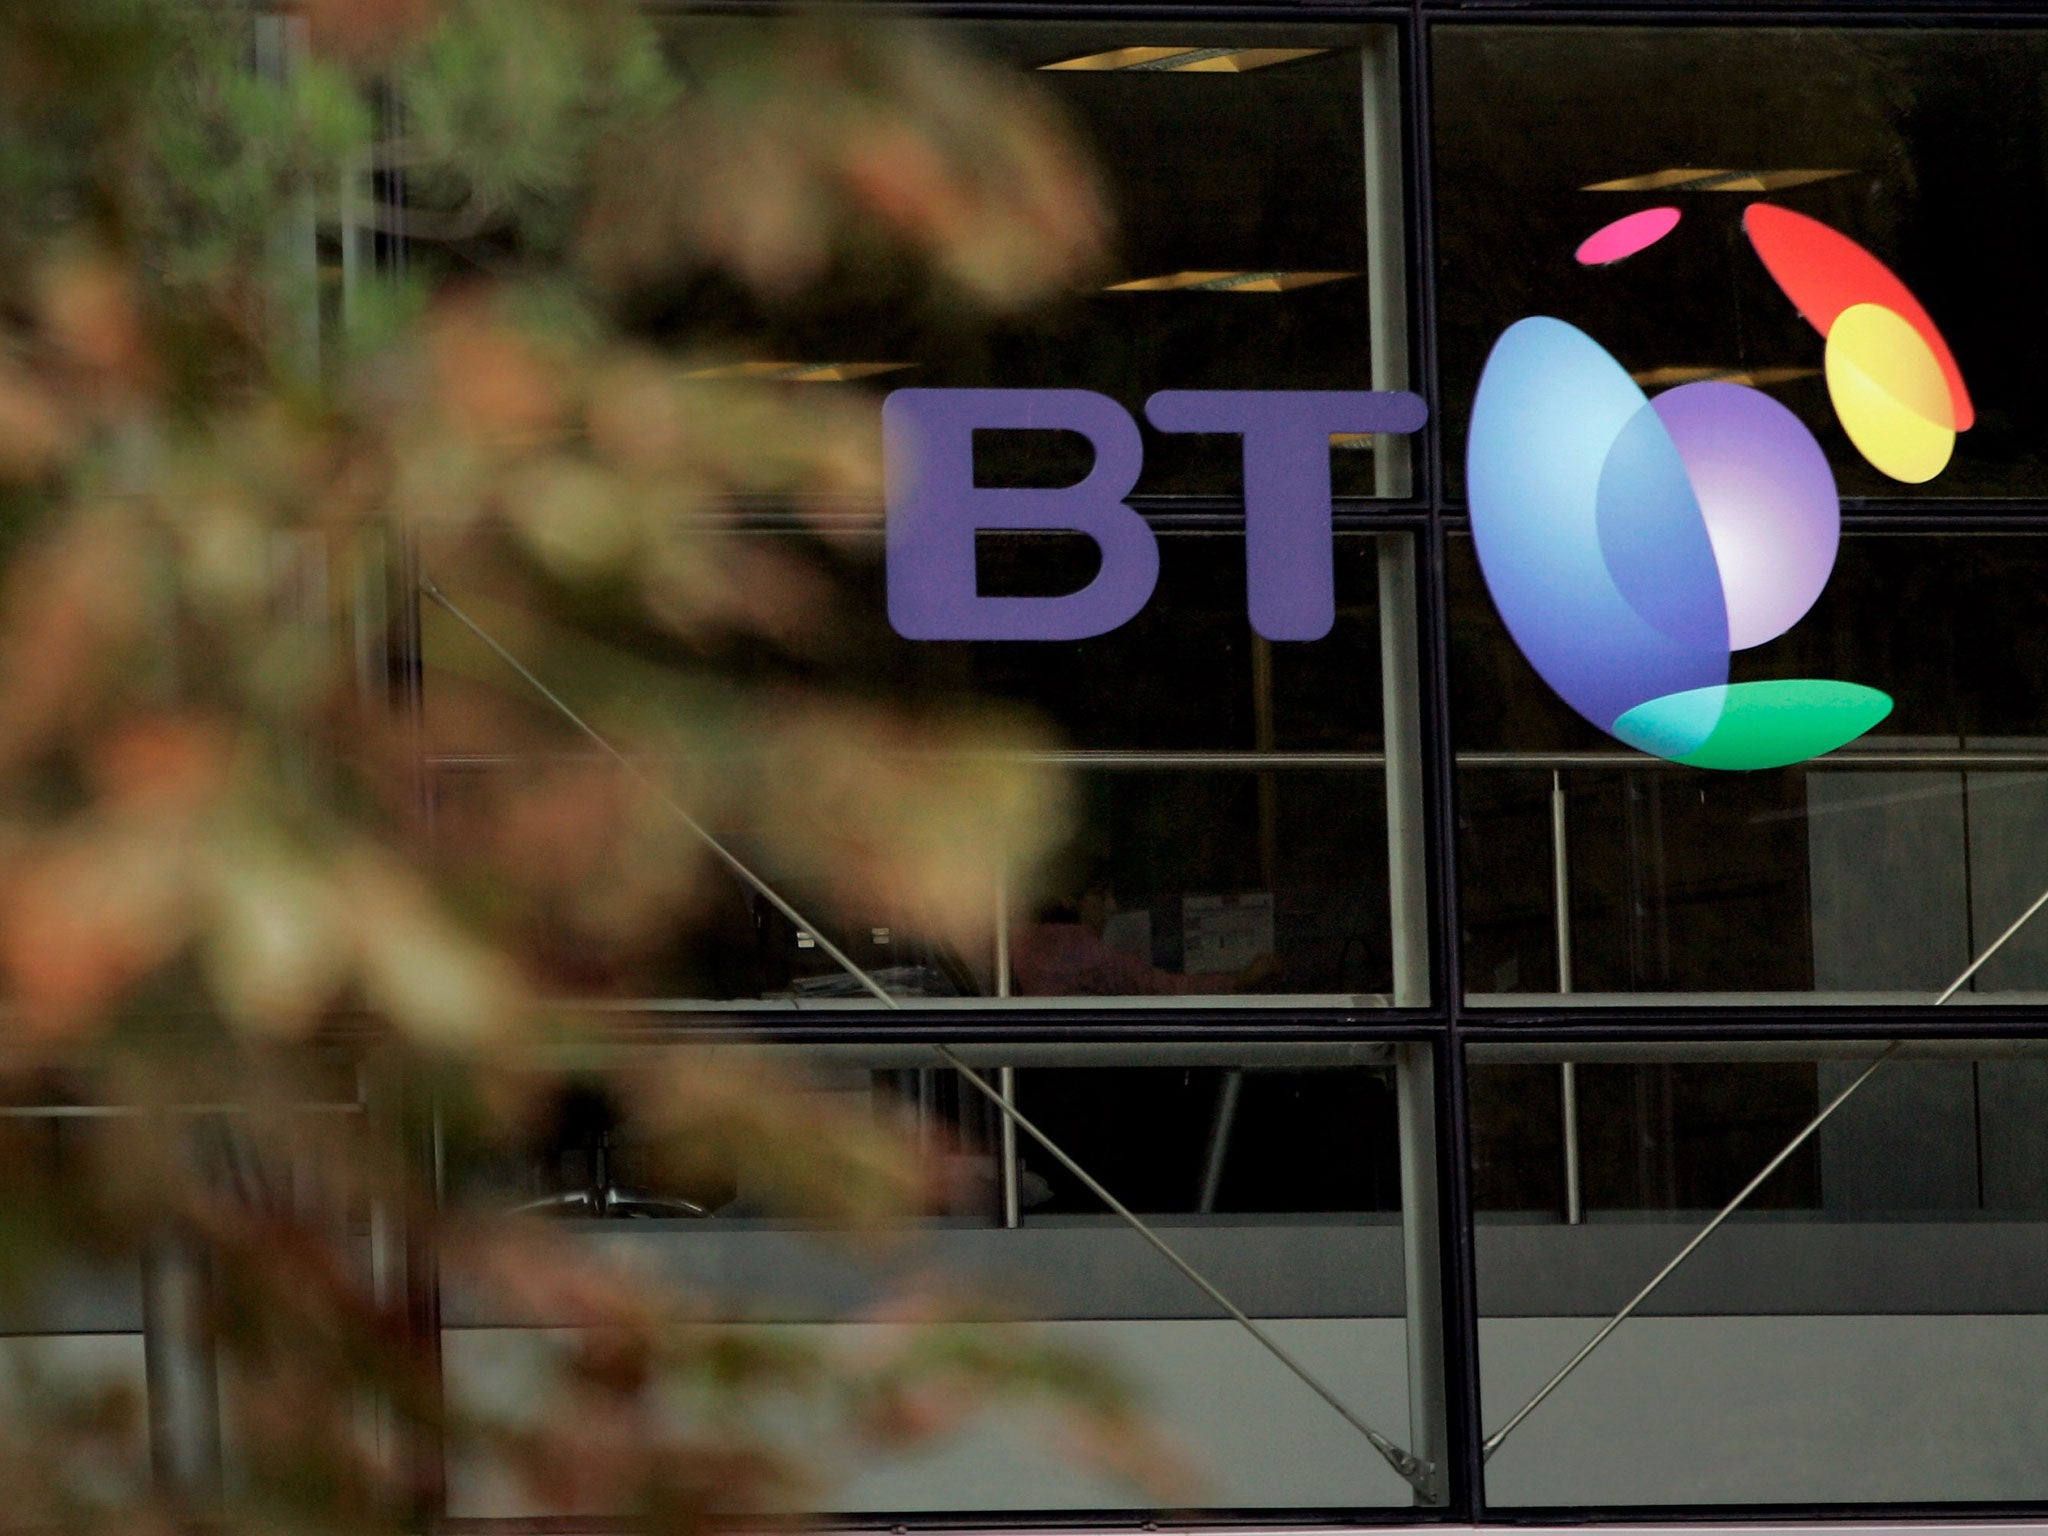 The process will see BT place shares on the stock market on 17 February